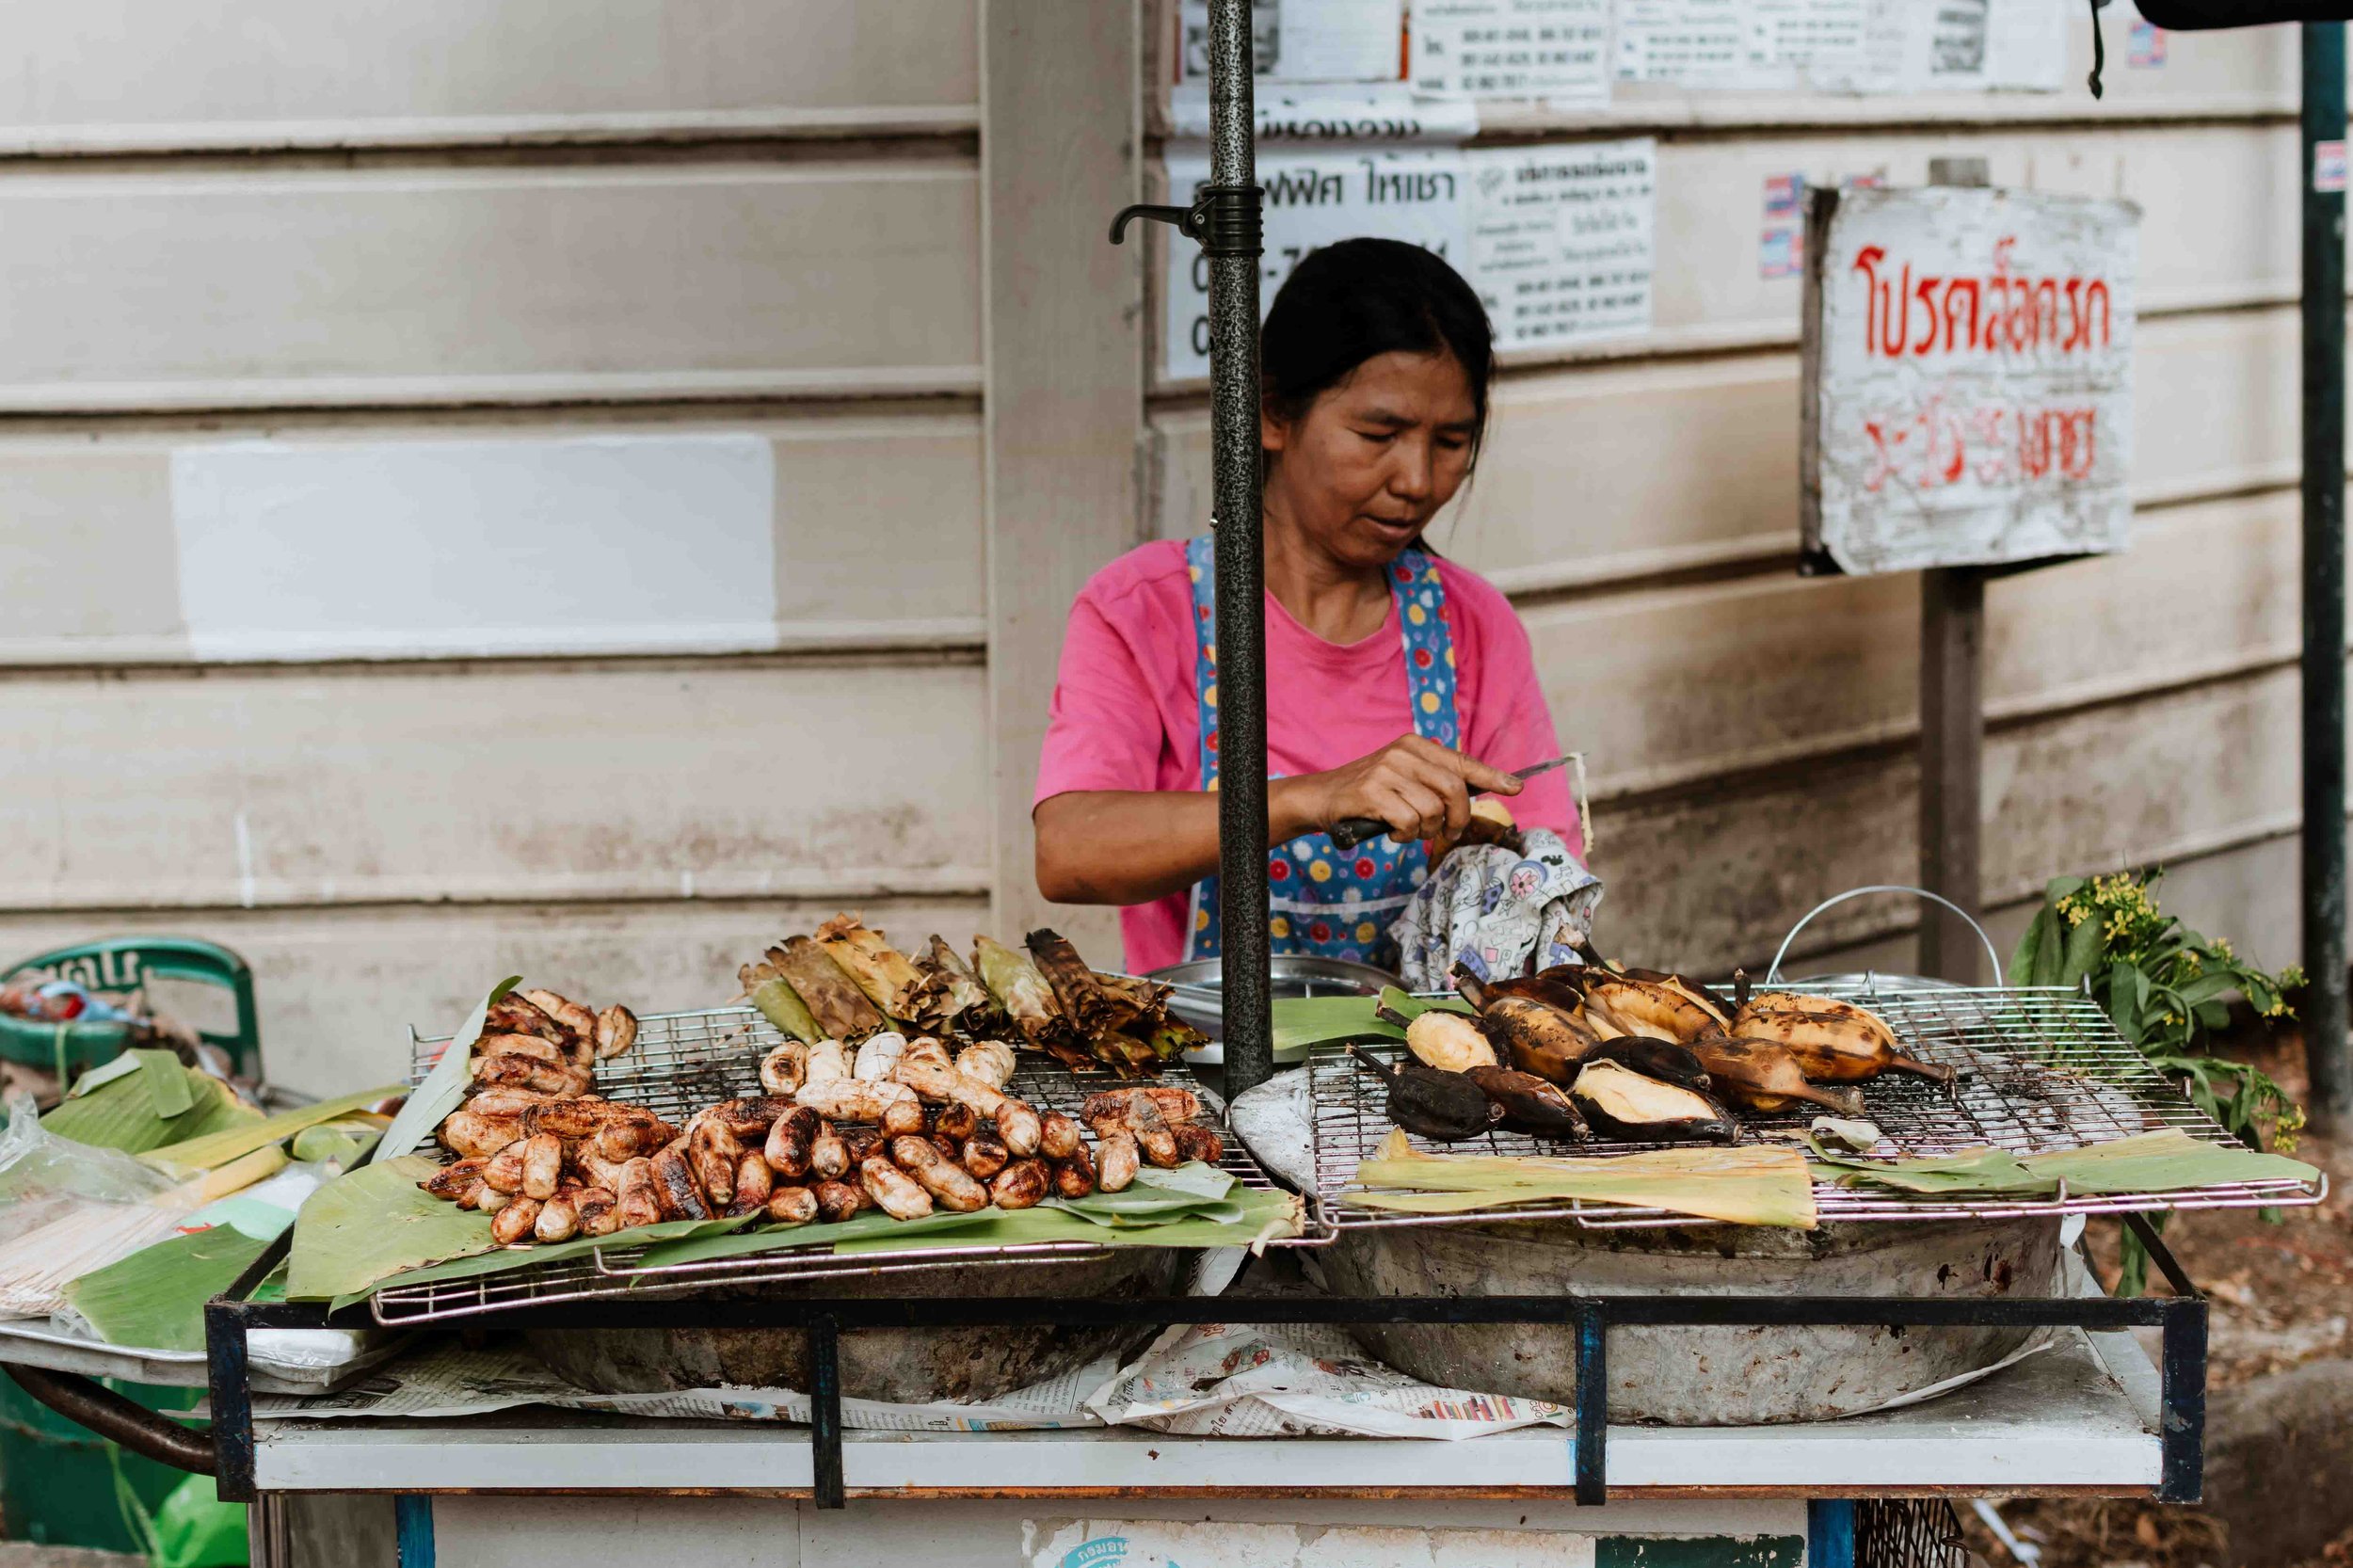 A vendor making and selling street food in phuket on a phuket thailand itinerary